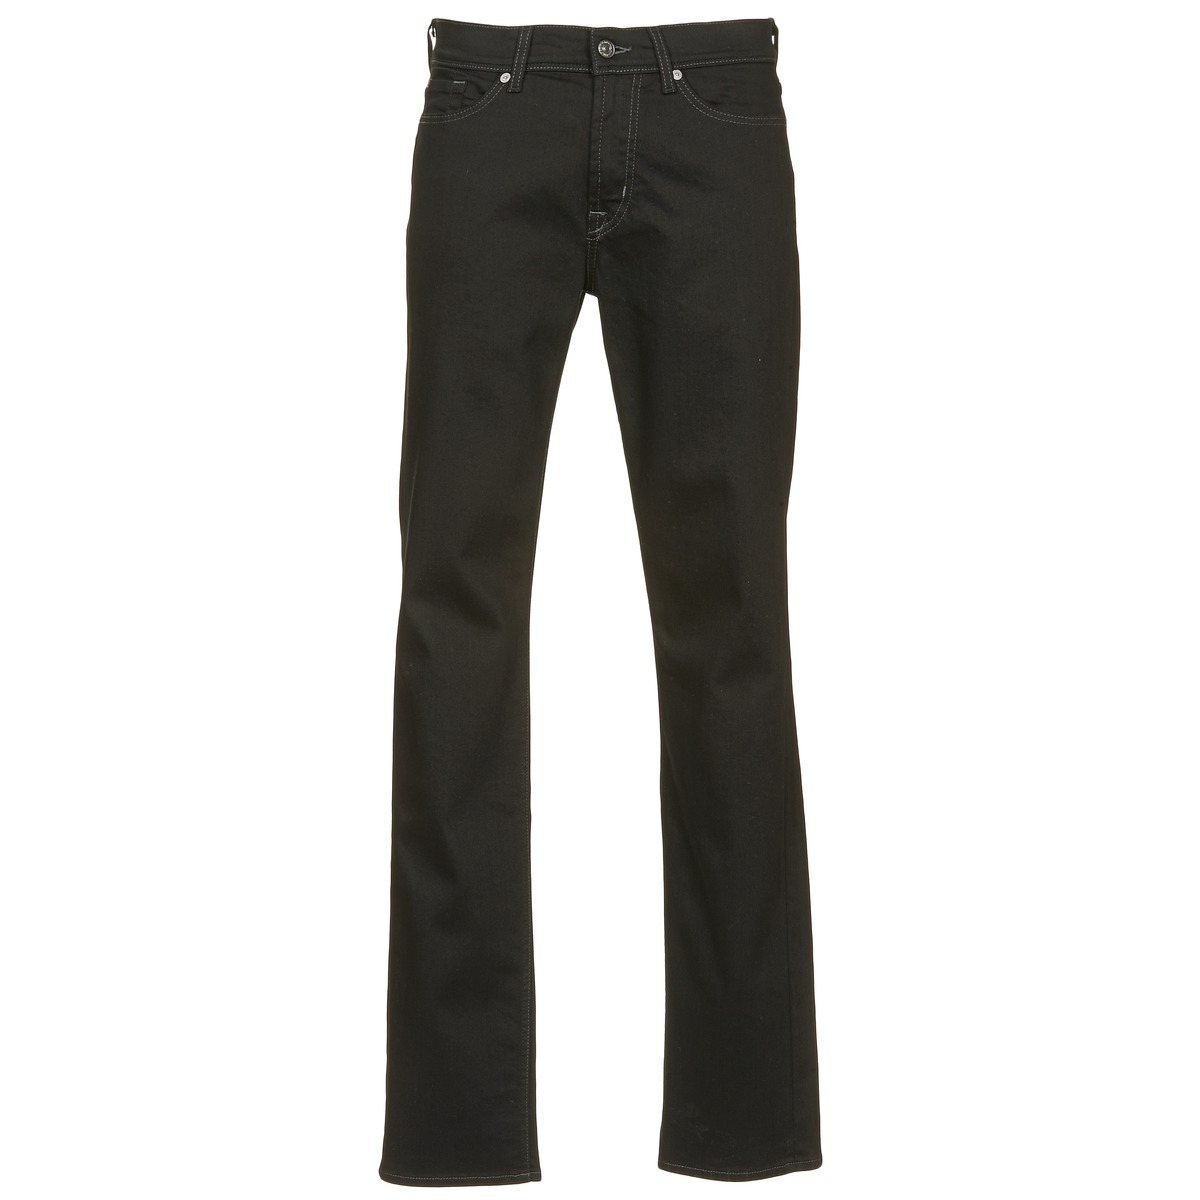 Spartoo - Black - Mens Skinny Jeans - 7 For All Mankind GOOFASH